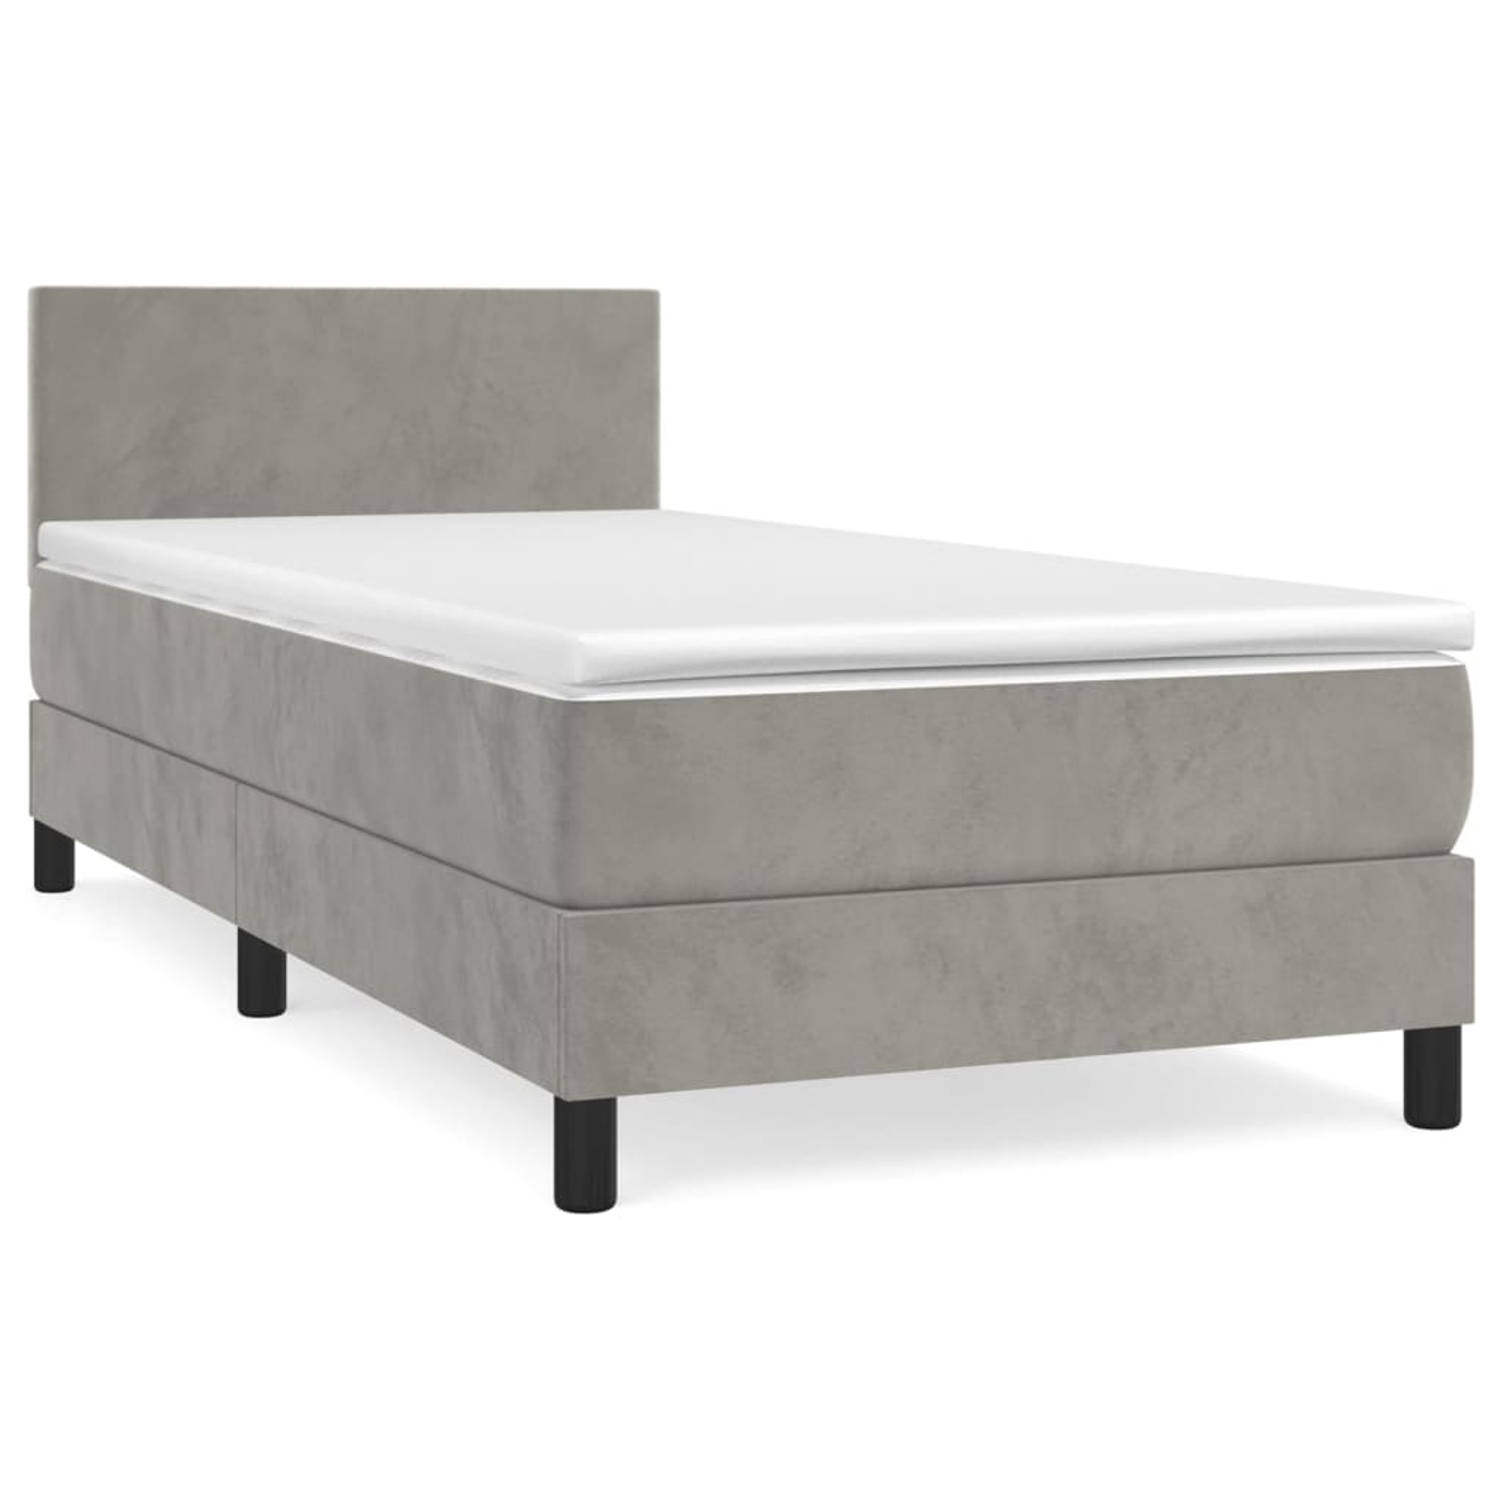 The Living Store Bed - Boxspringbed 100x200 cm - Zacht fluweel